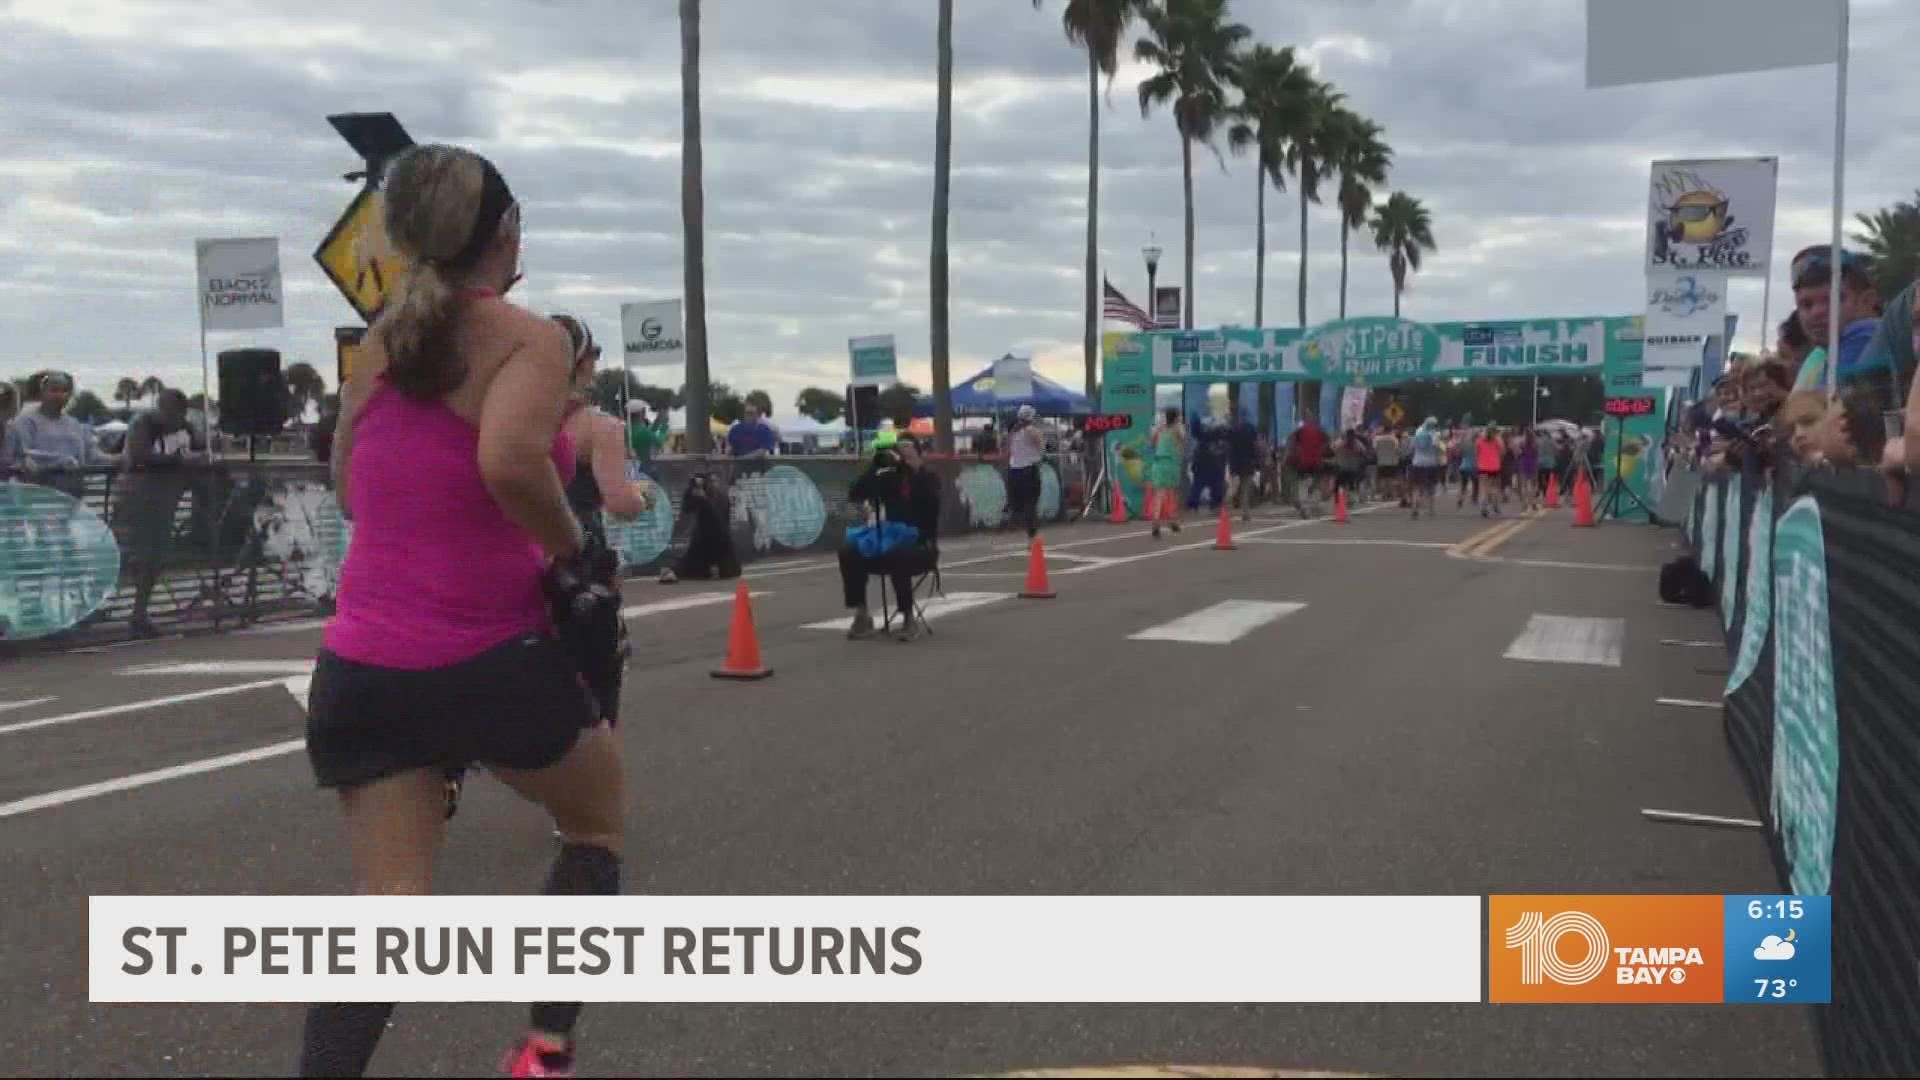 The half-marathon is taking place on Sunday with races beginning on Bayshore Drive.